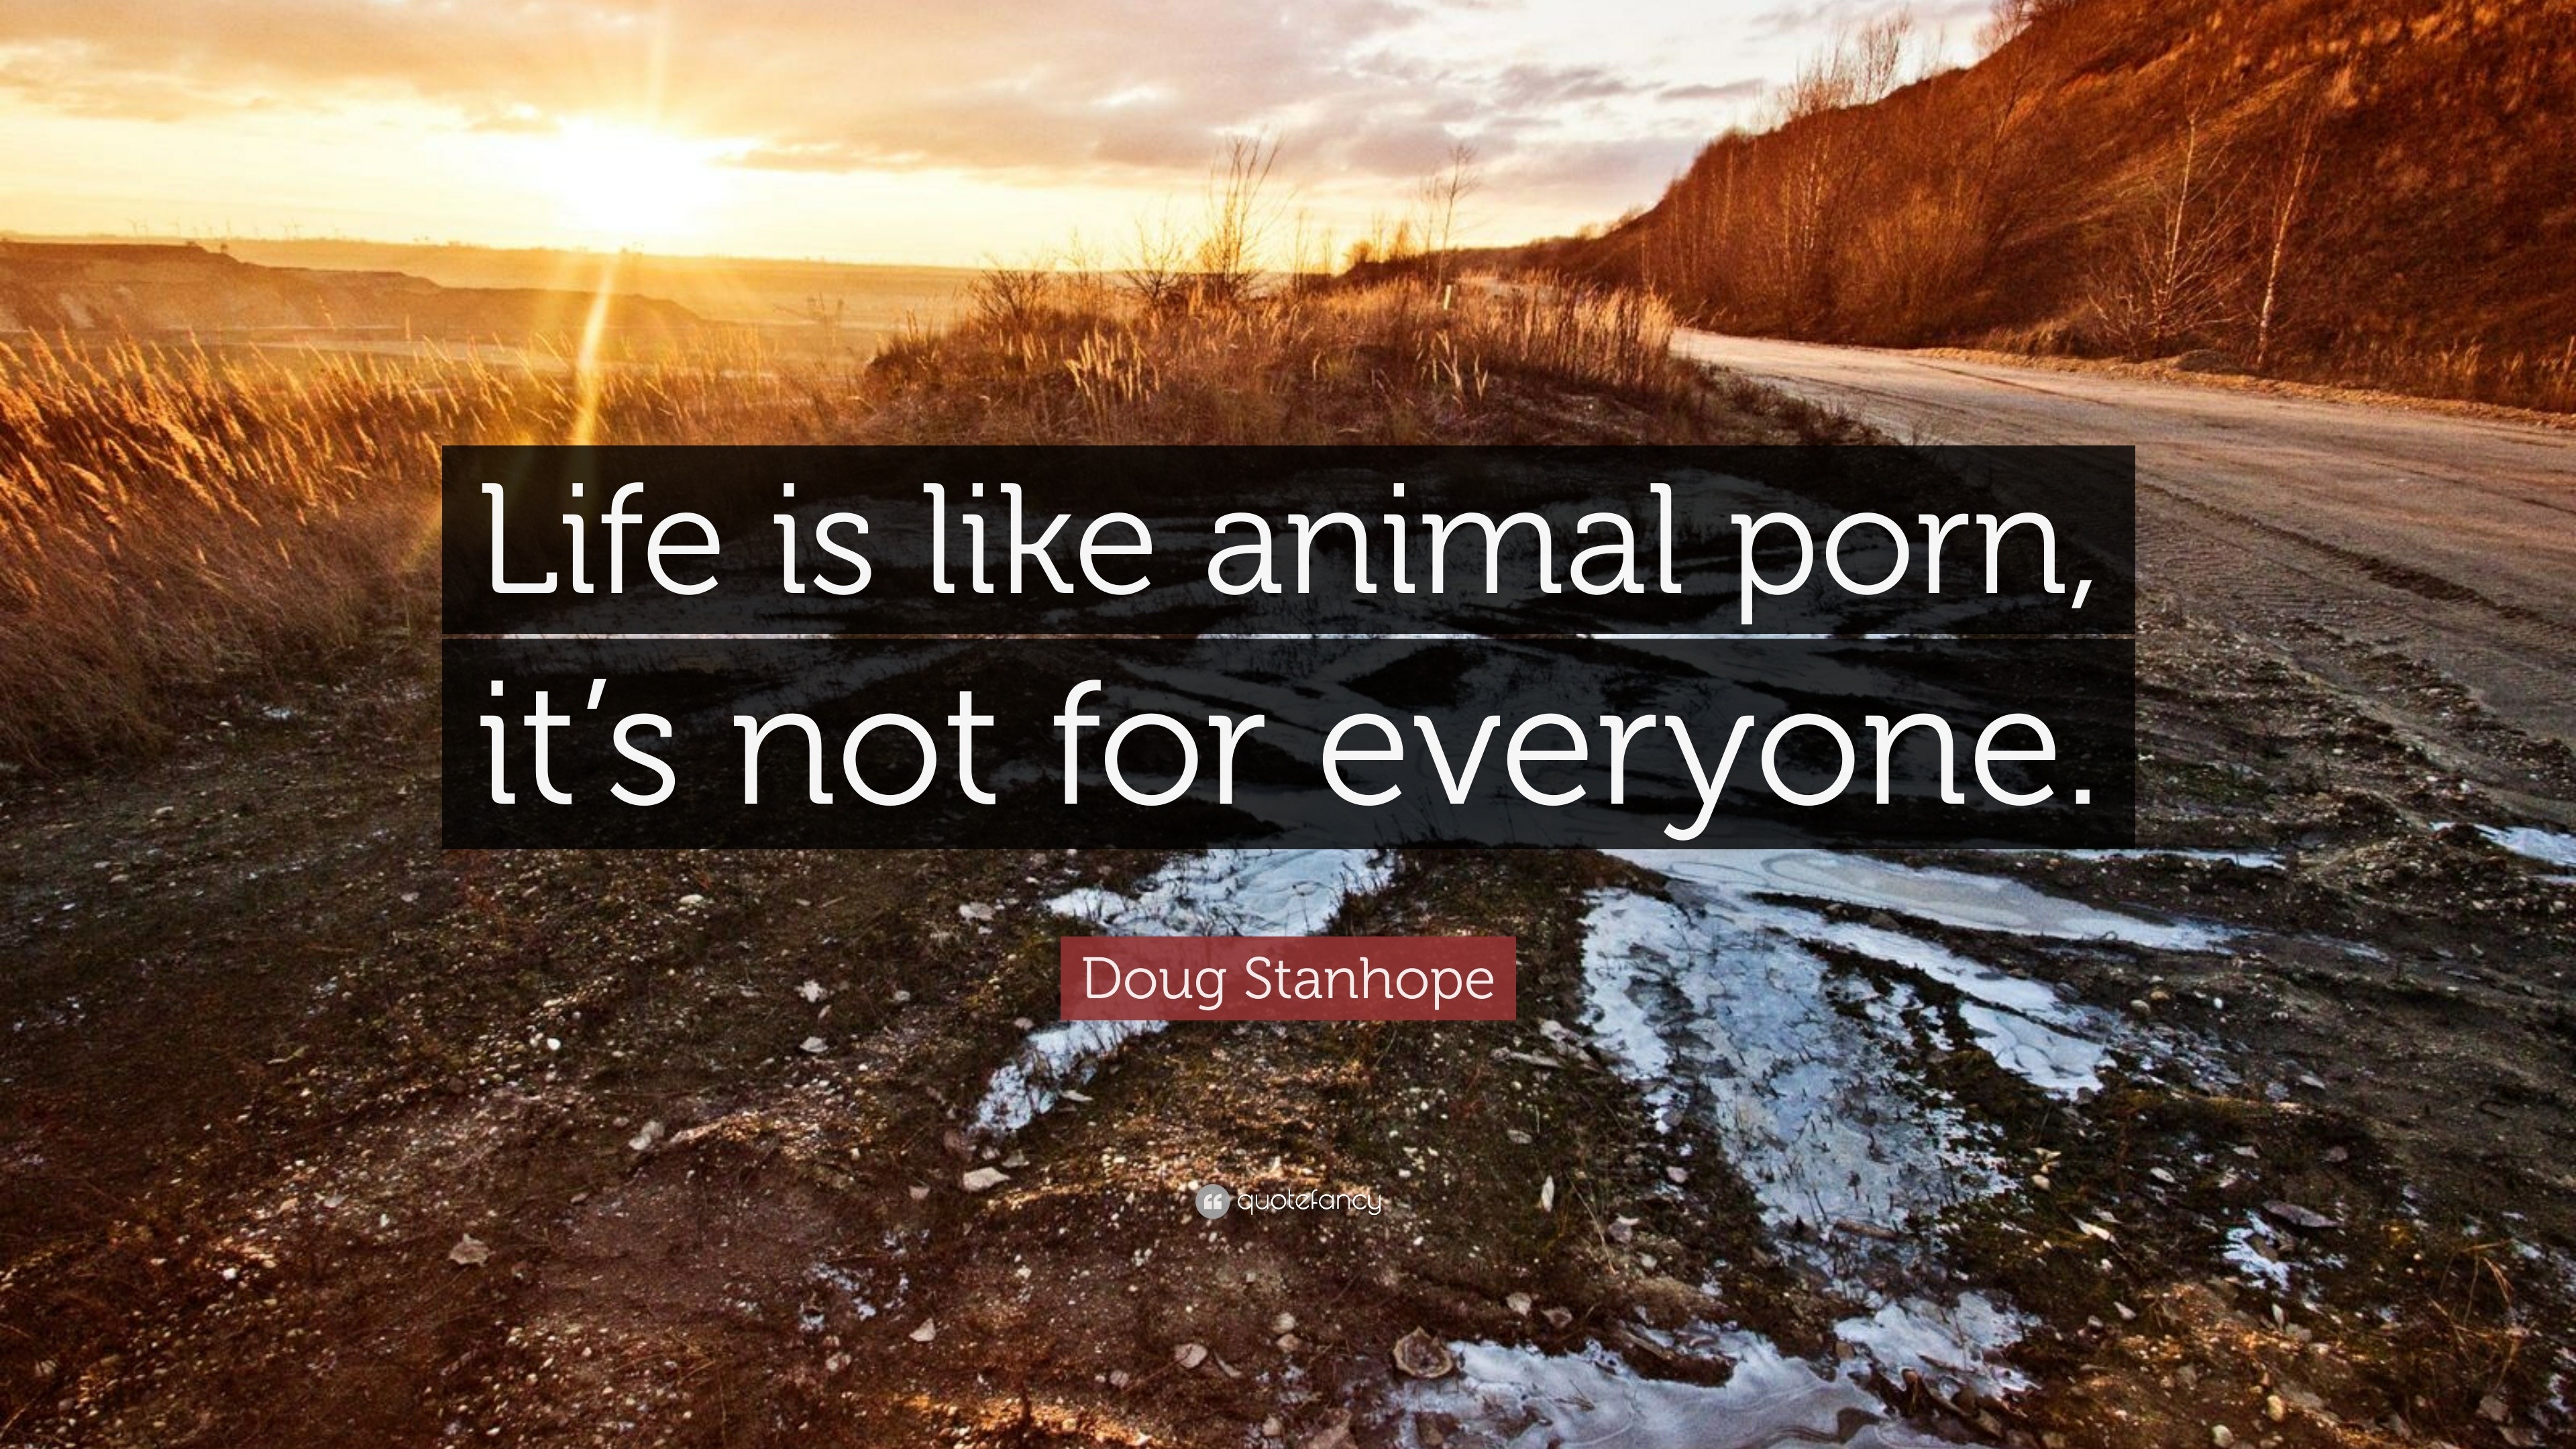 Its Not Porn - Doug Stanhope Quote: â€œLife is like animal porn, it's not for everyone.â€